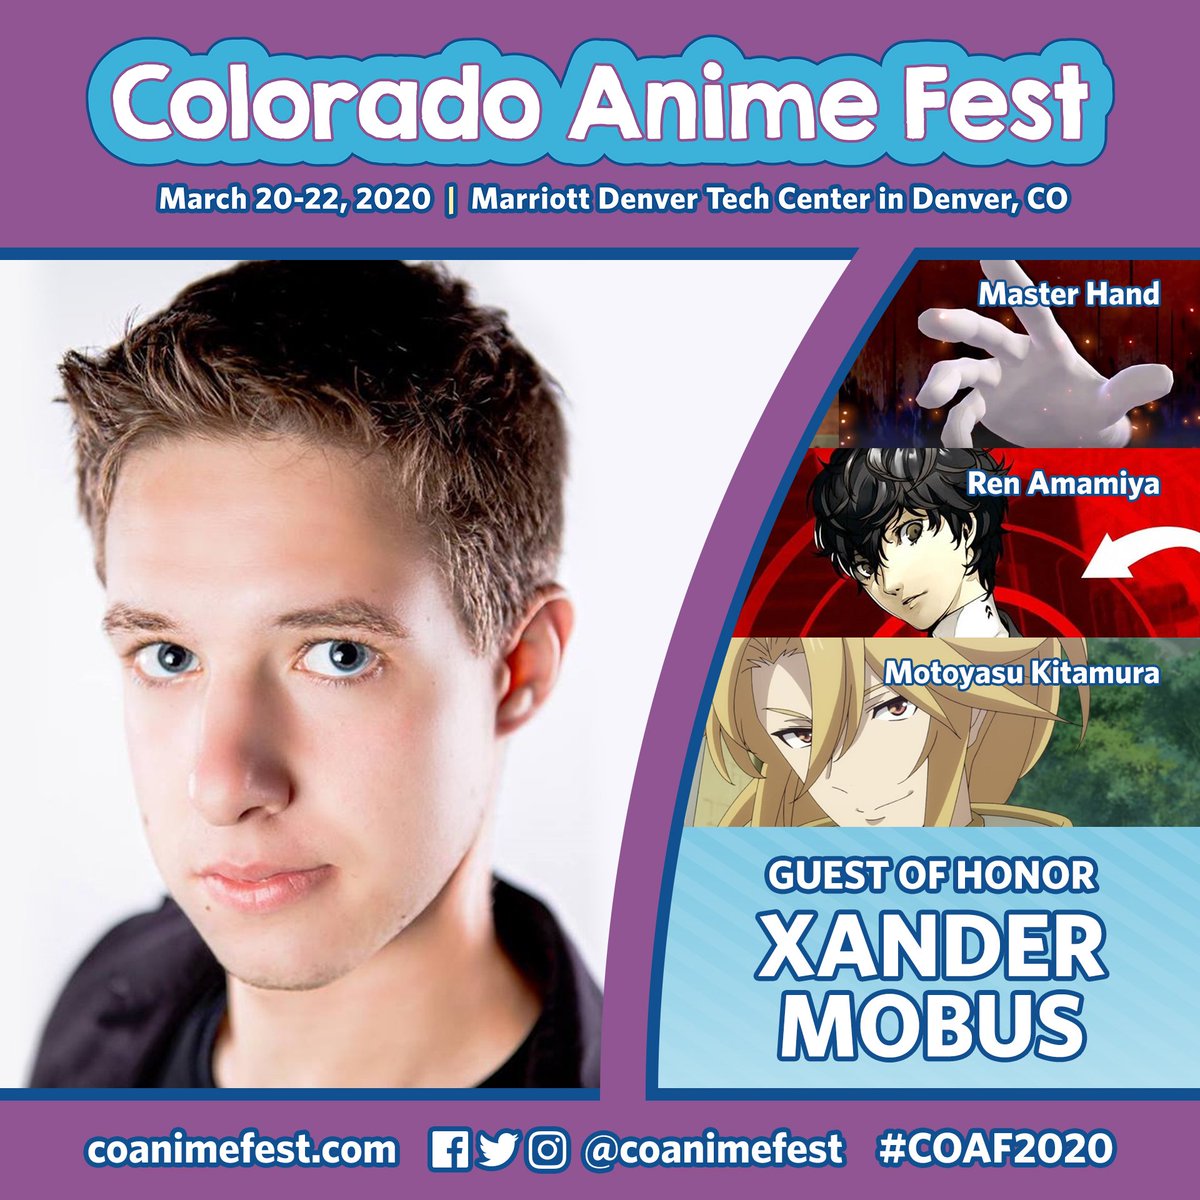 Colorful Characters of the Colorado Anime Fest  Denver  Denver Westword   The Leading Independent News Source in Denver Colorado